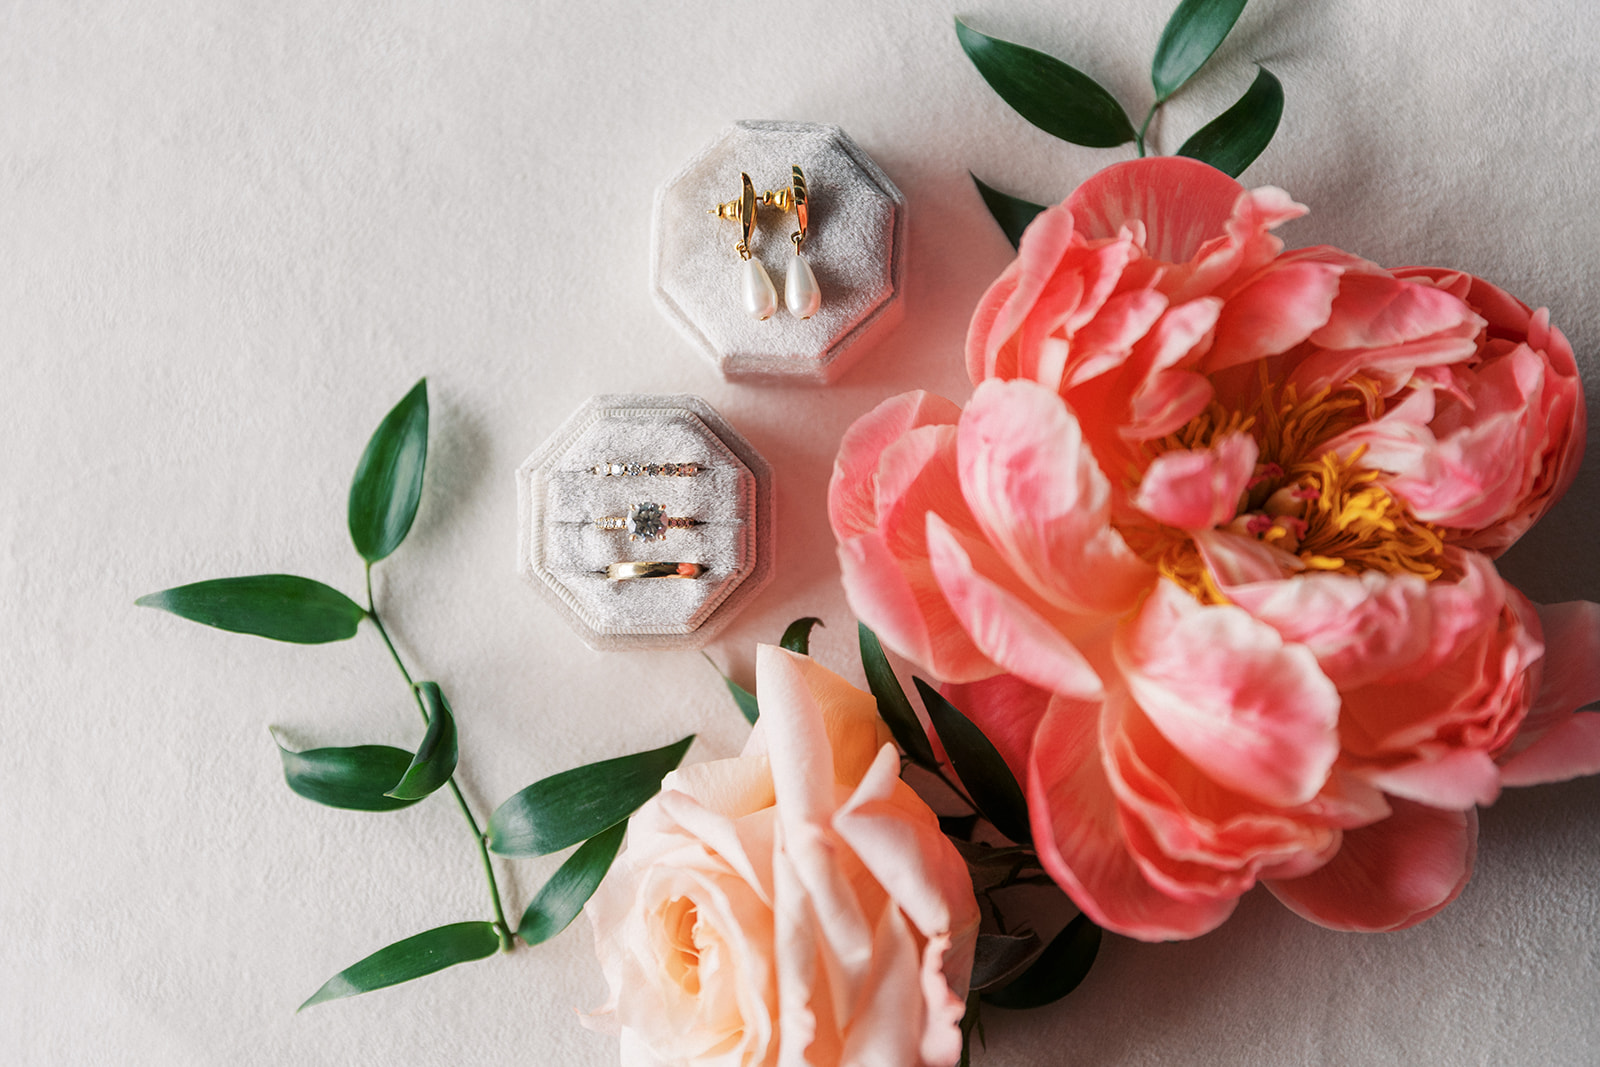 Details of wedding rings and pearl earrings with a pink flower